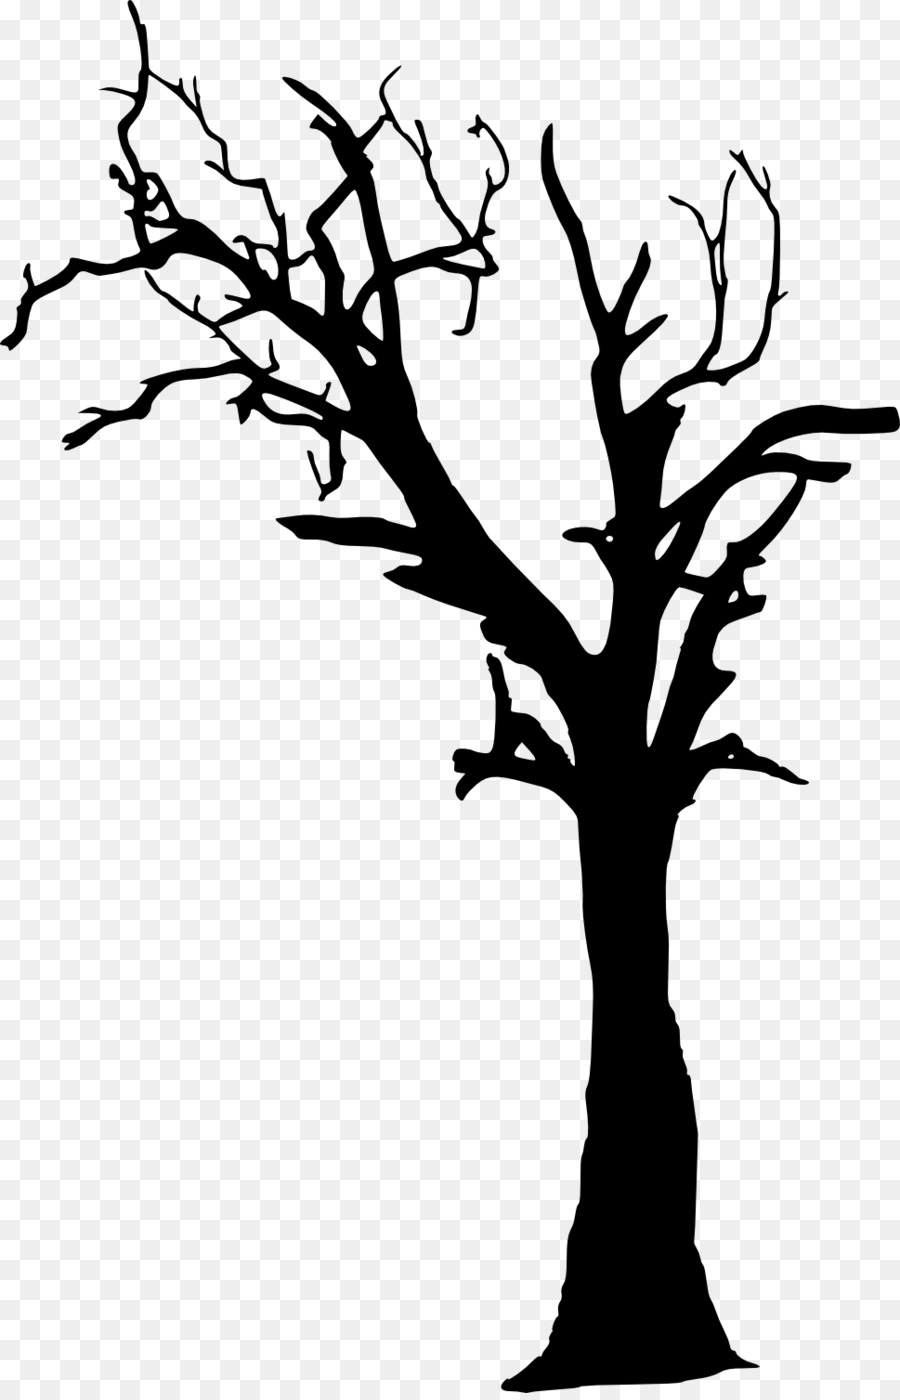 Silhouette Photography Clip art - tree silhouette png download - 969*1500 - Free Transparent Silhouette png Download.